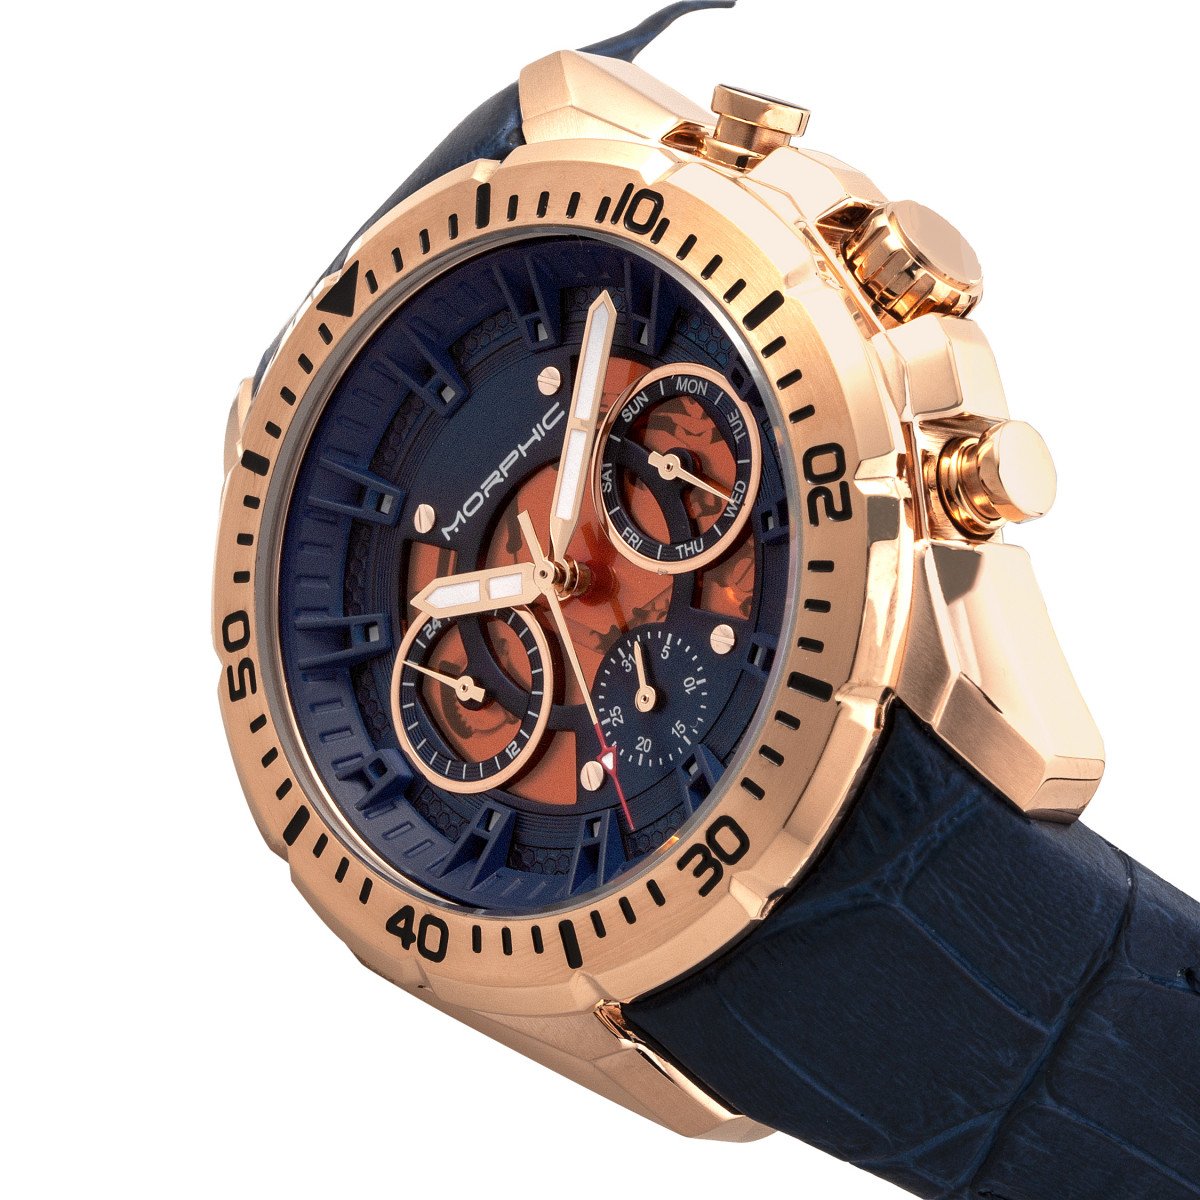 Morphic M66 Series Skeleton Dial Leather-Band Watch w/ Day/Date - Rose Gold/Blue - MPH6605